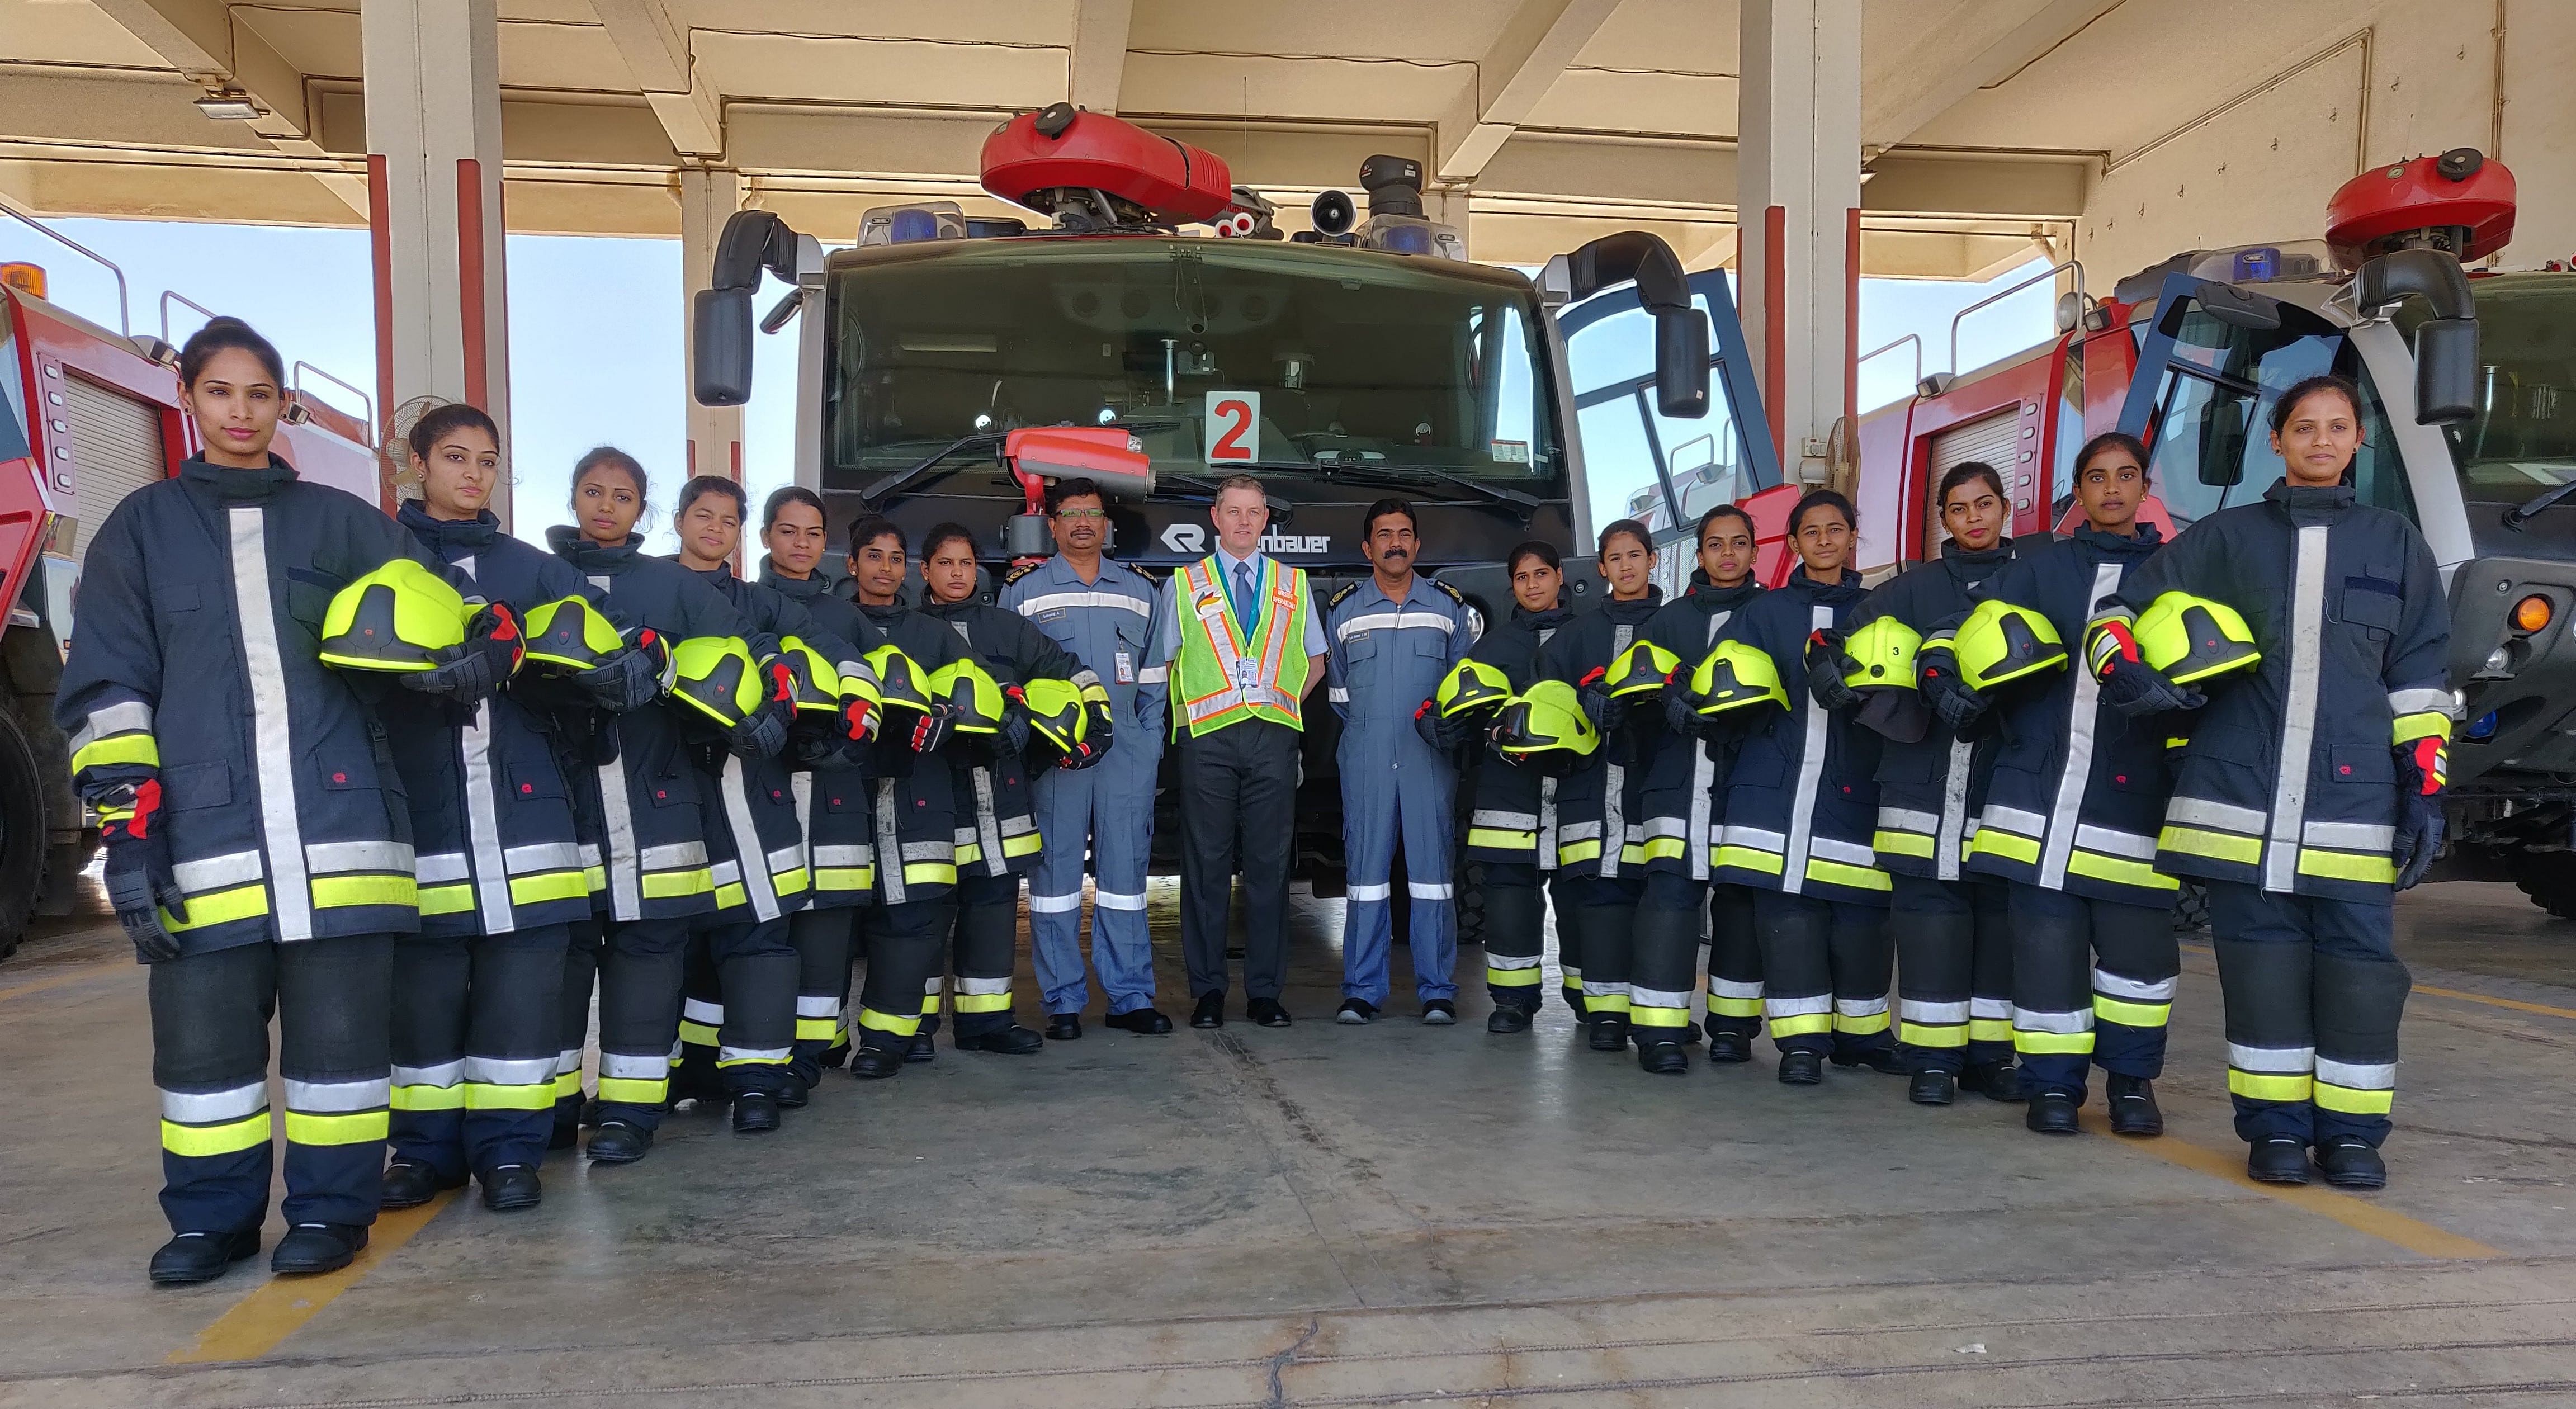 KIA operator, the Bangalore International Airport Limited (BIAL) has inducted 14 women firefighters into its Aircraft Rescue & Fire Fighting (ARFF) squad. 